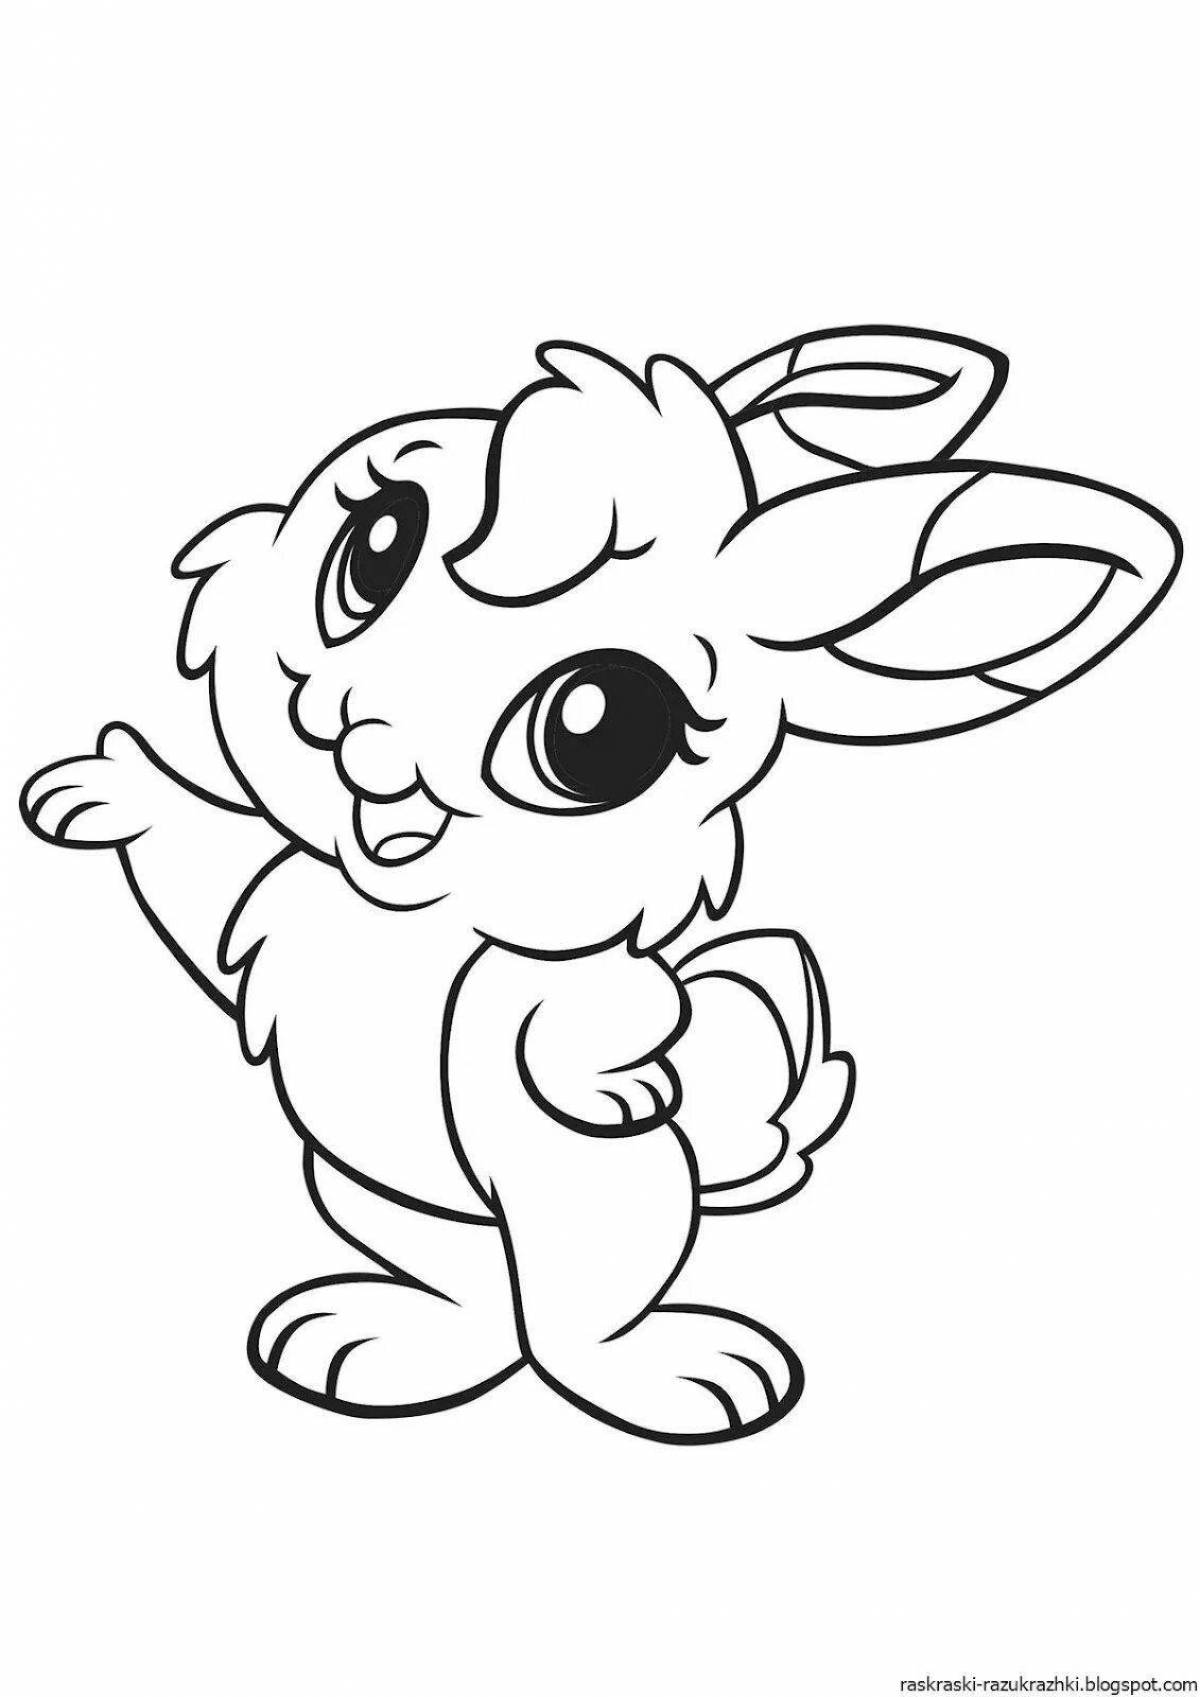 Cute rabbit coloring for girls